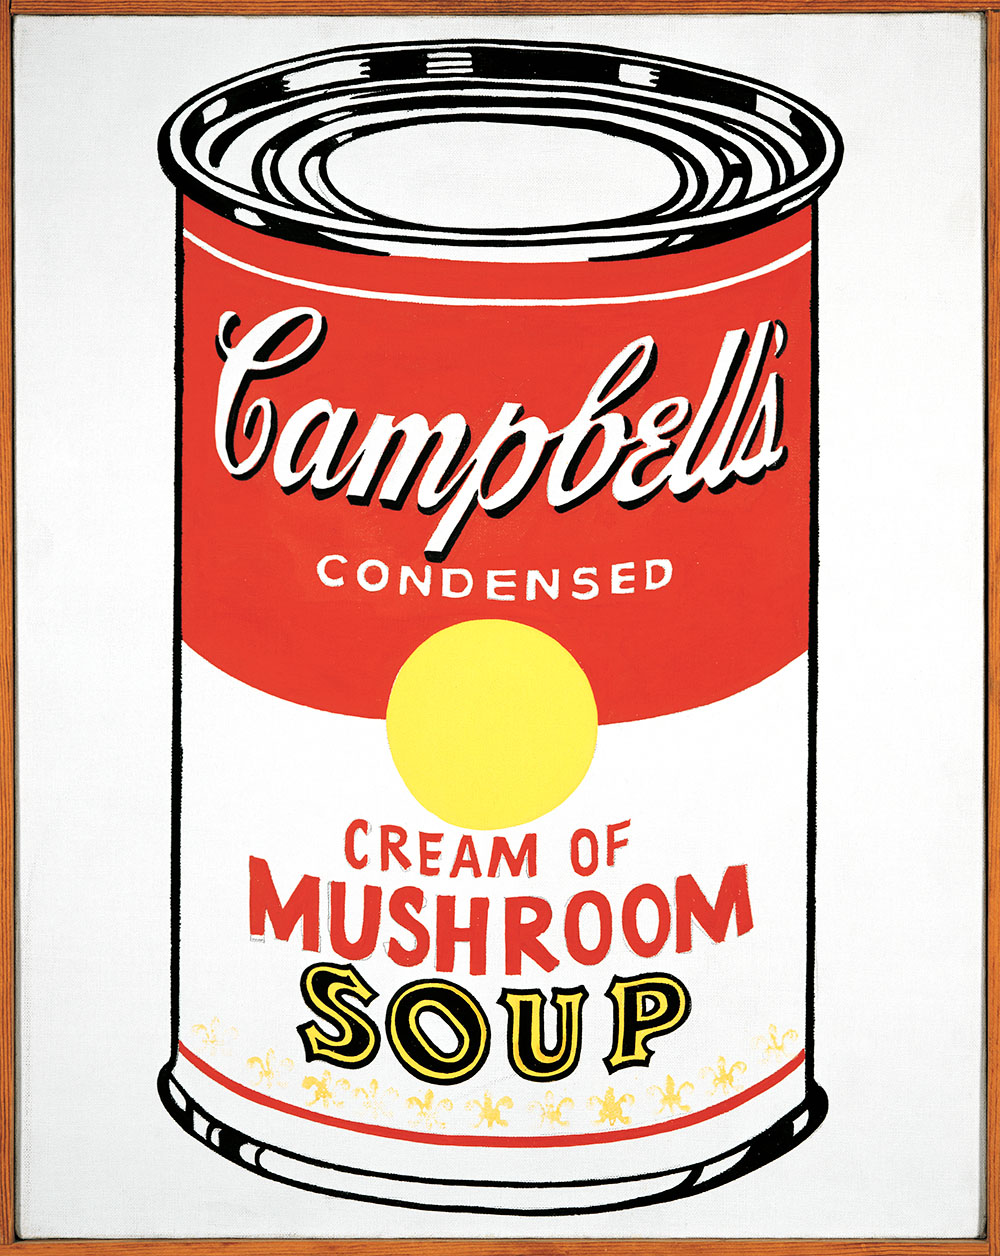 A clean print of a Campbell's Soup can